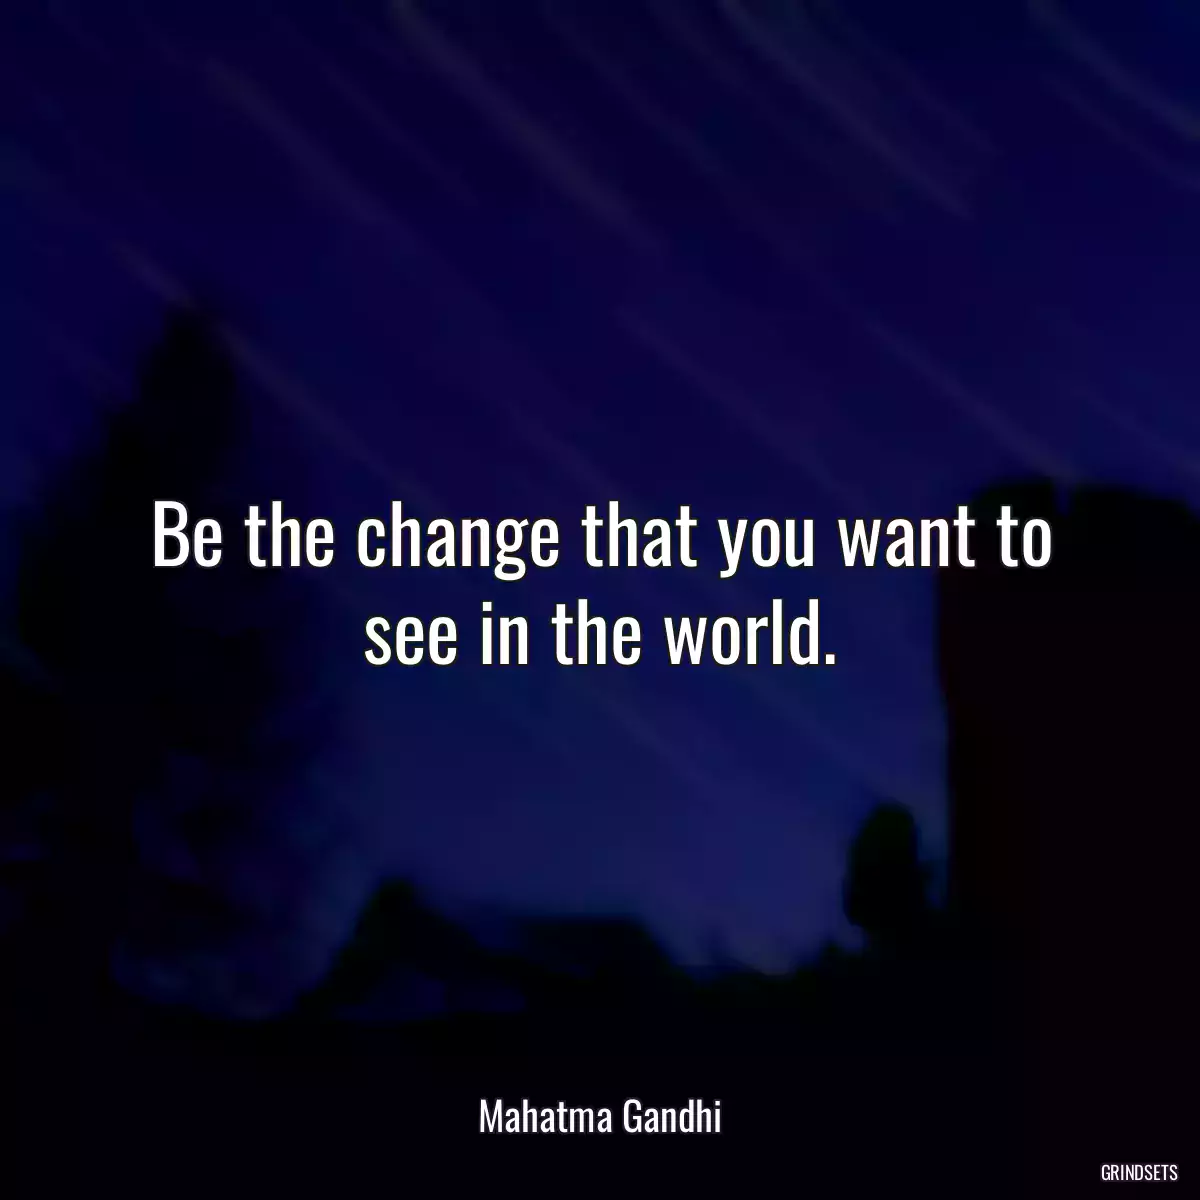 Be the change that you want to see in the world.